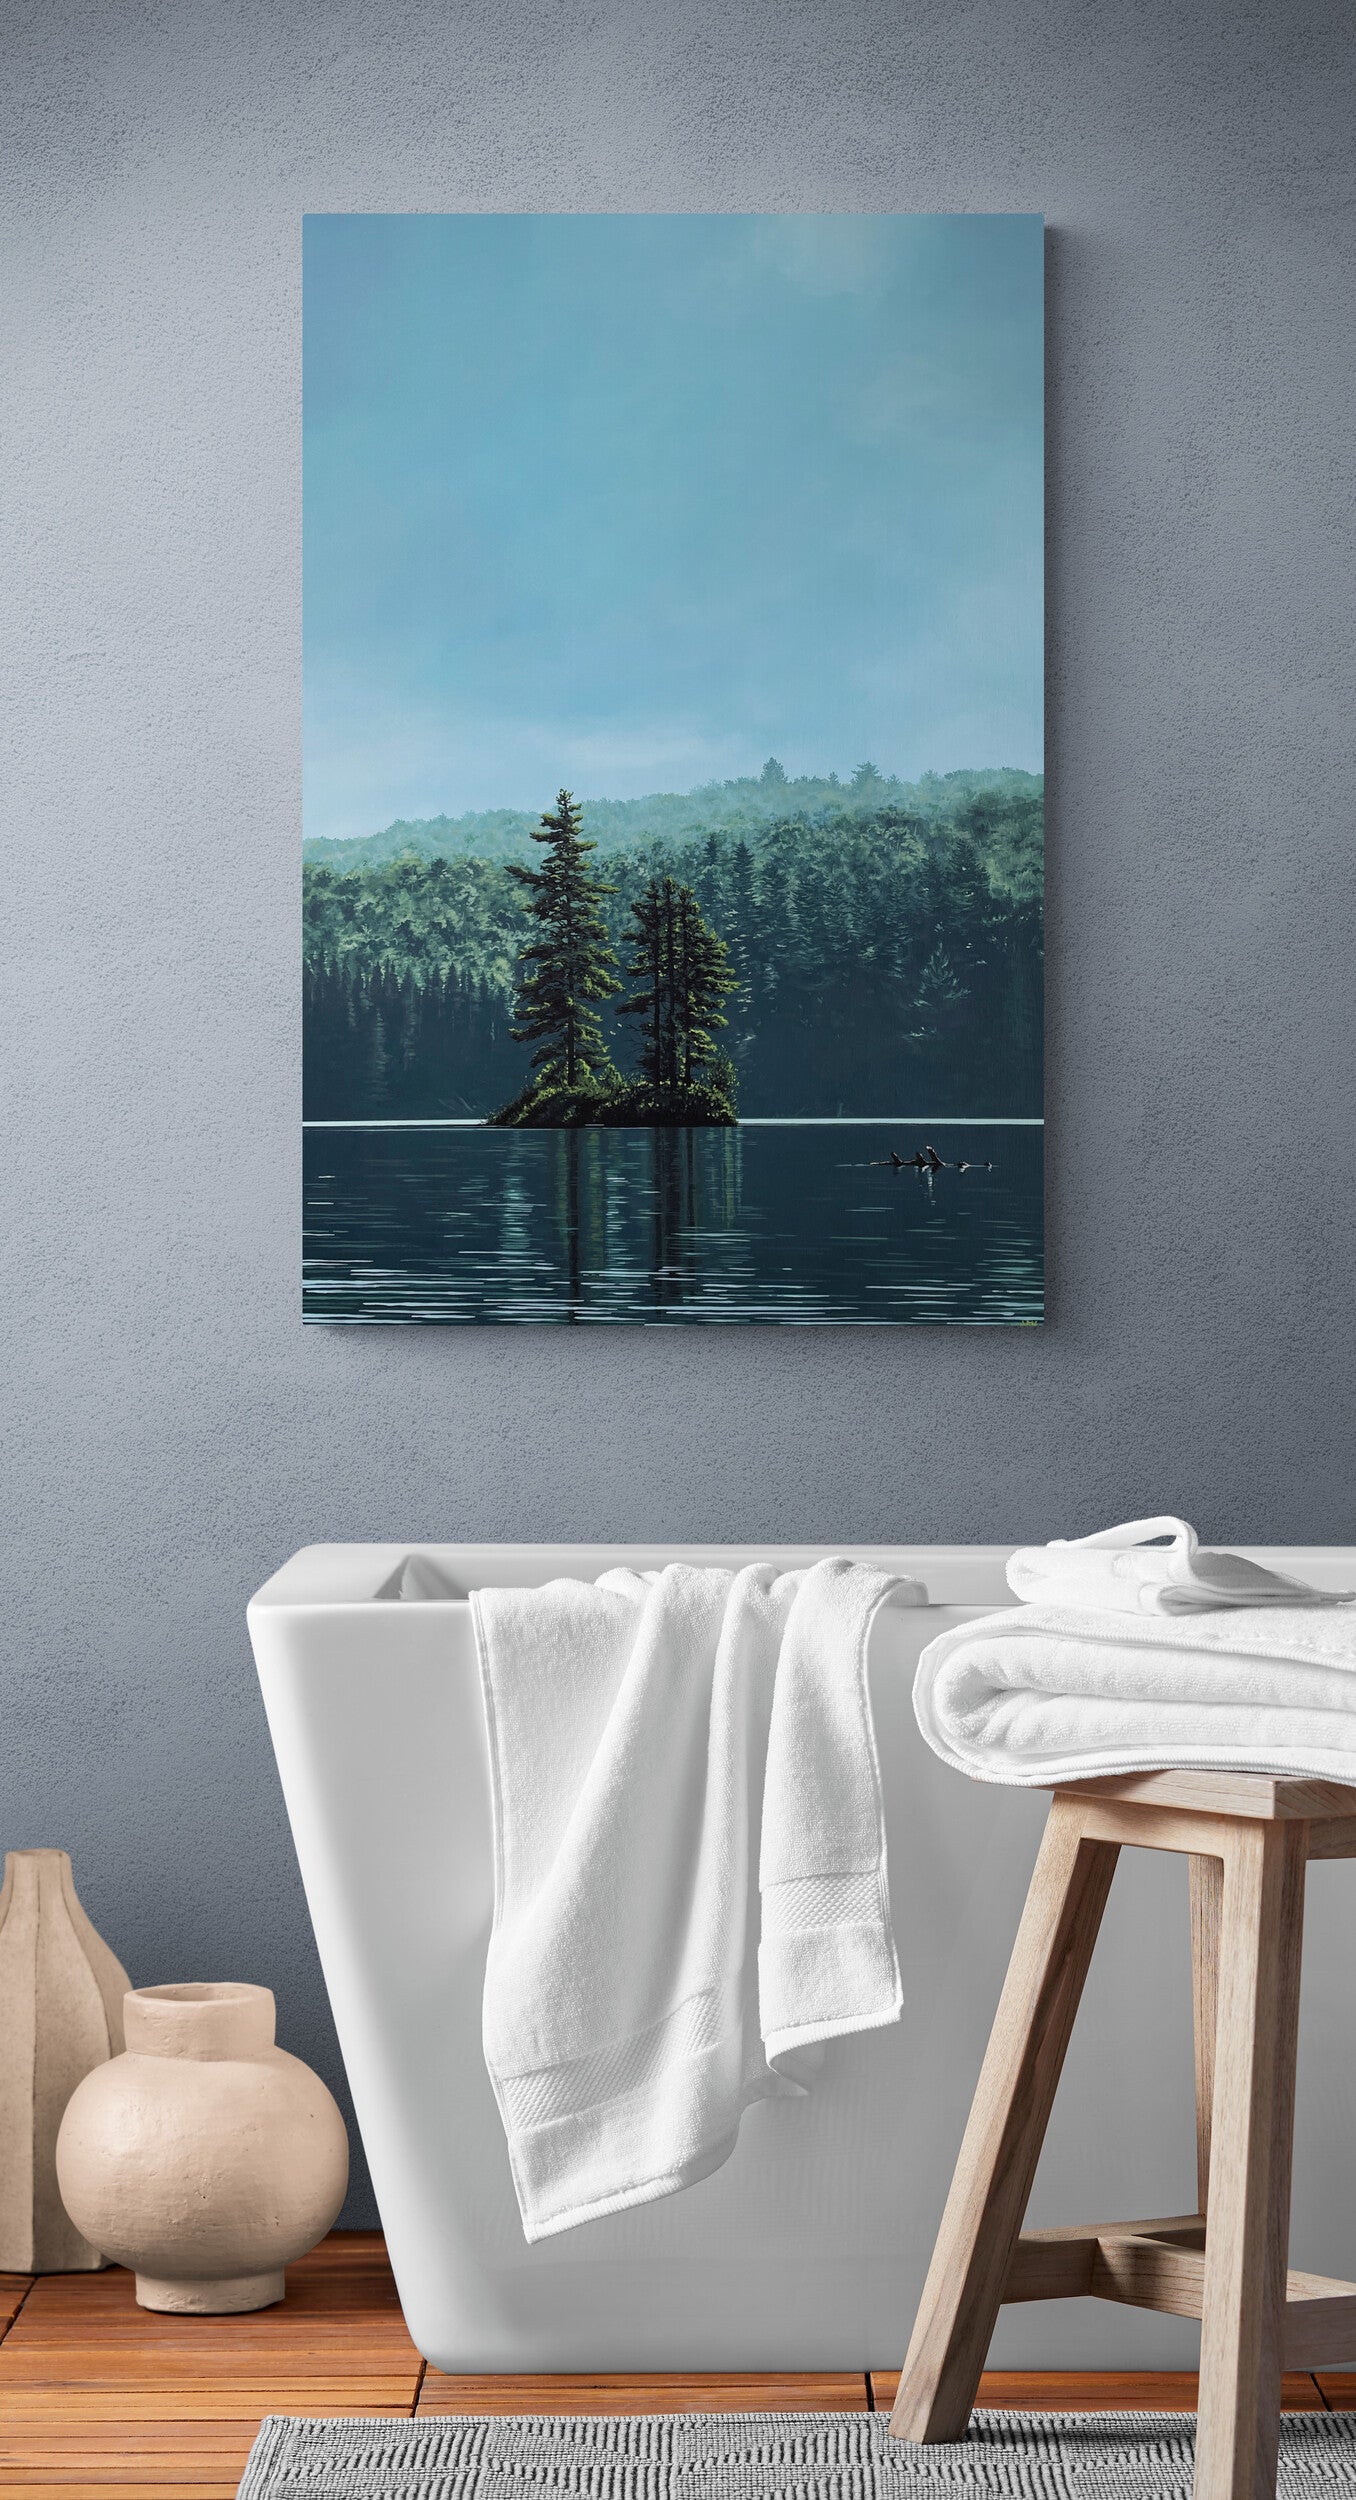 The original painting "Tranquility" by Hannah Kilby from Hannah Michelle Studios, displayed on a wall.